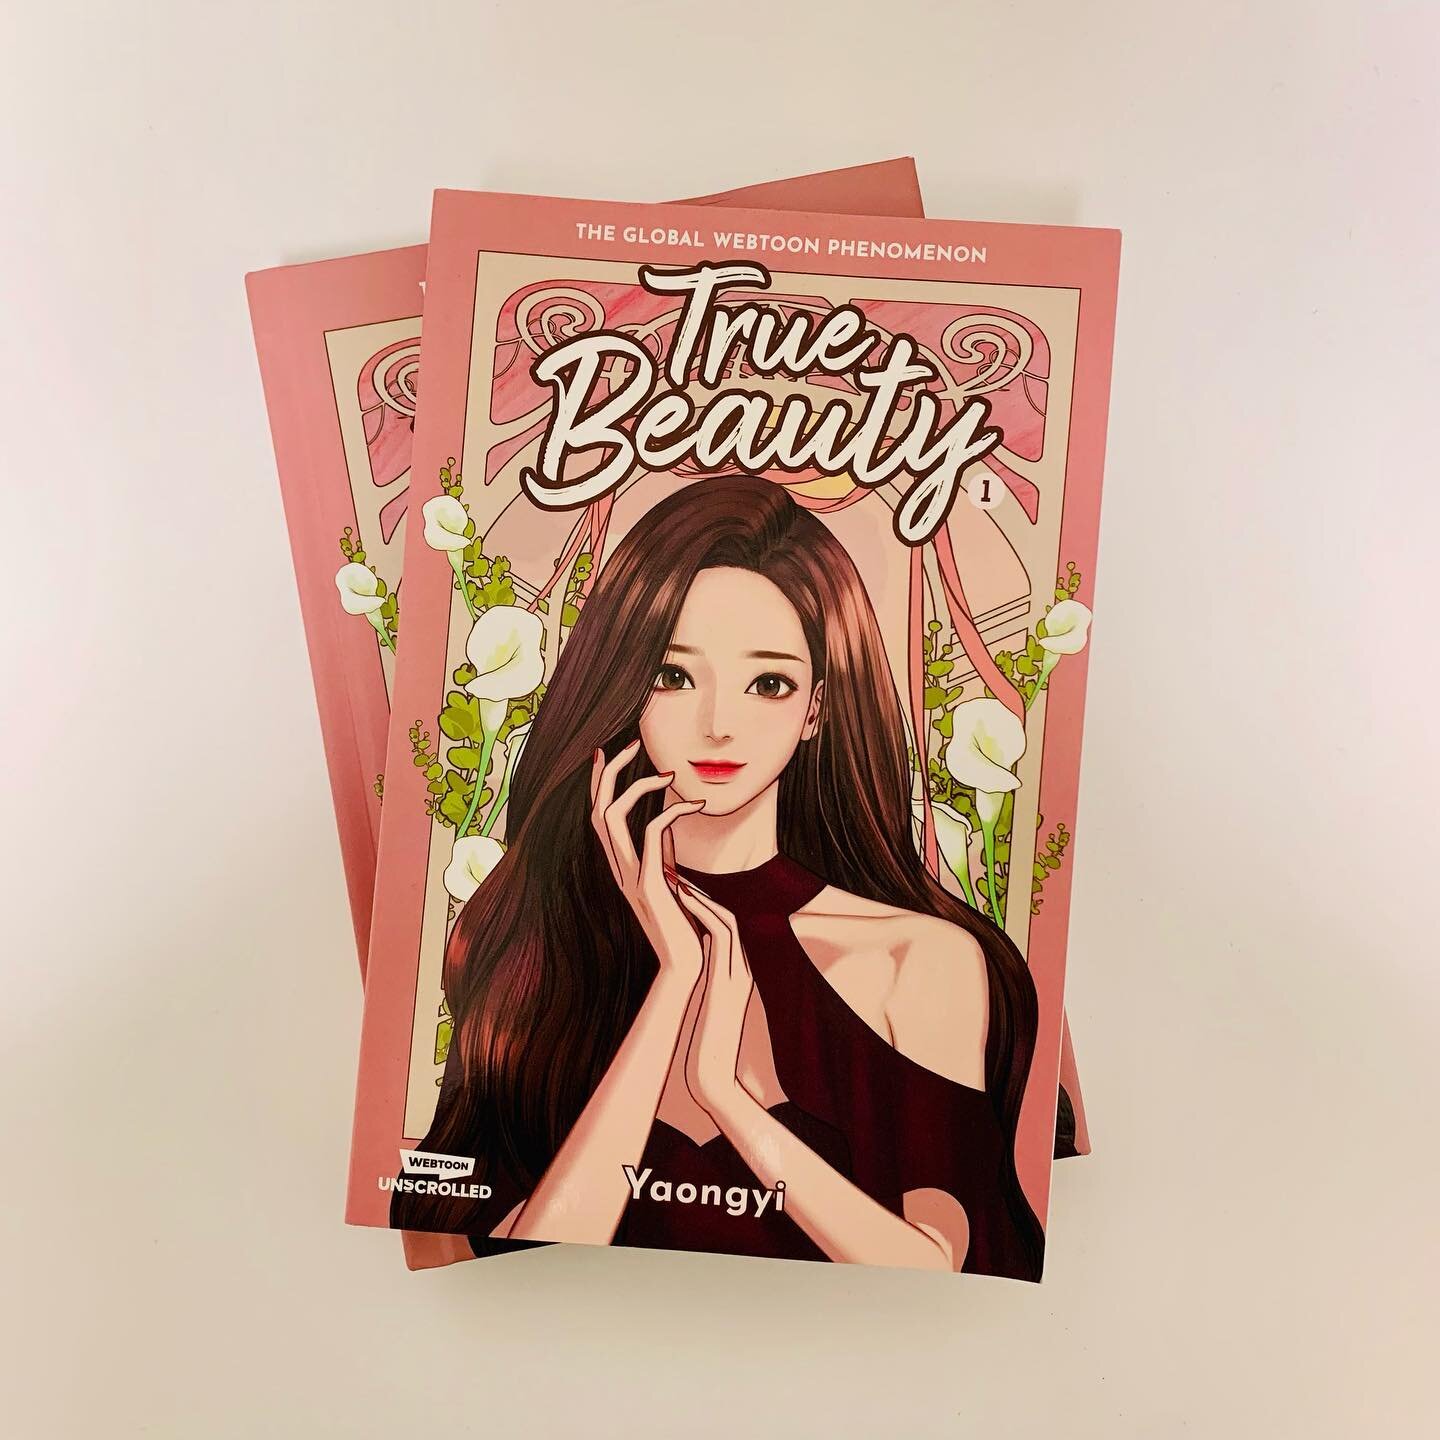 it's been a while since my last post, but i finally got copies of true beauty vol. 1! (thanks again @emmadaydreams!) 

while the cover and interior designs are similar to the original korean edition, i got to design the logo for the english edition! 